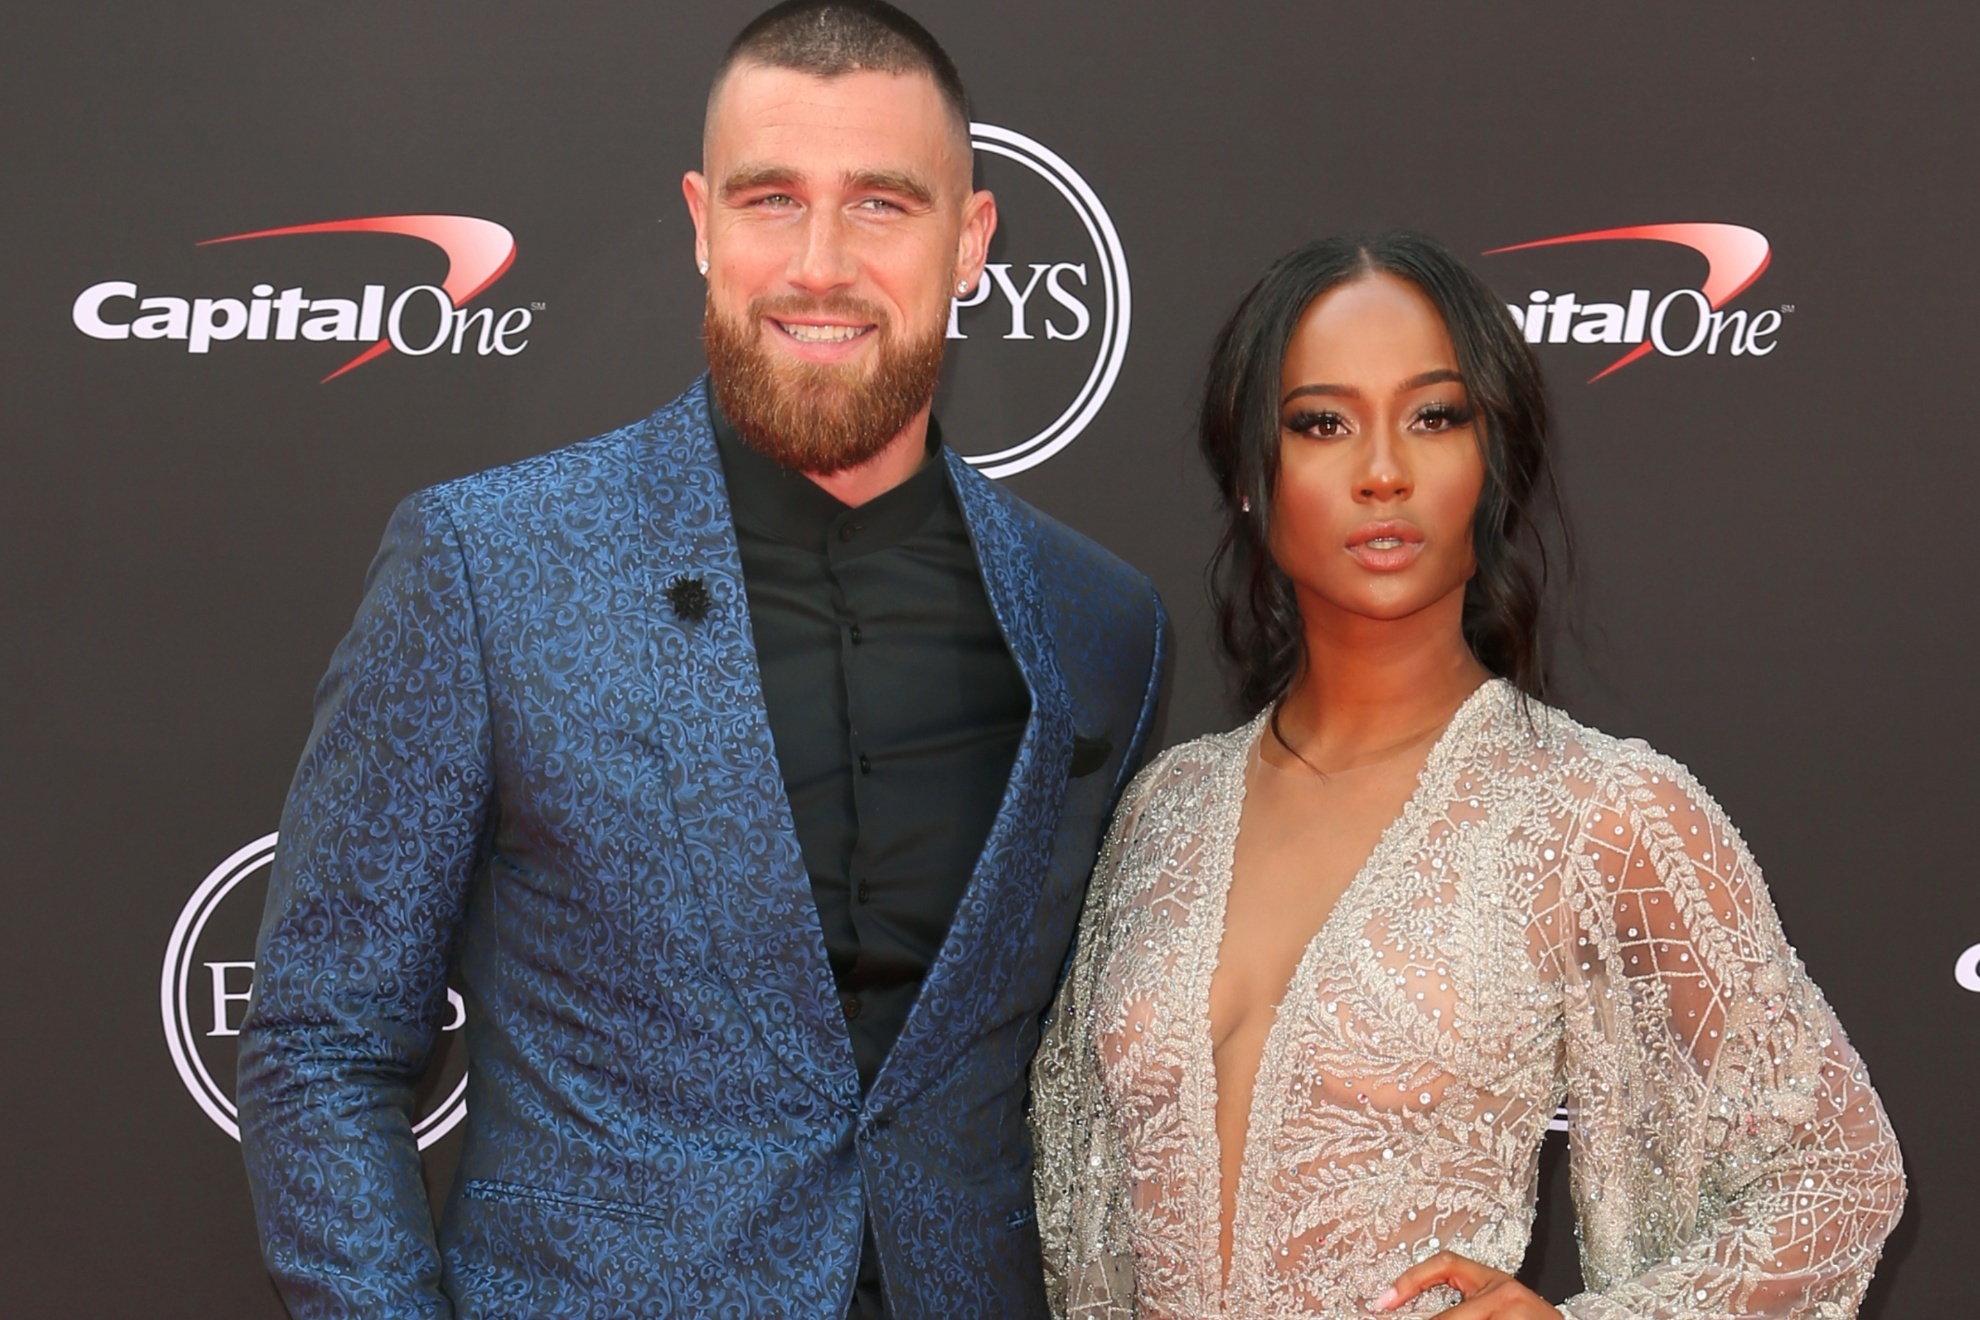 Kansas City Chiefs Travis Kelce and Kayla Nicole arrive at the ESPY Awards in 2018.